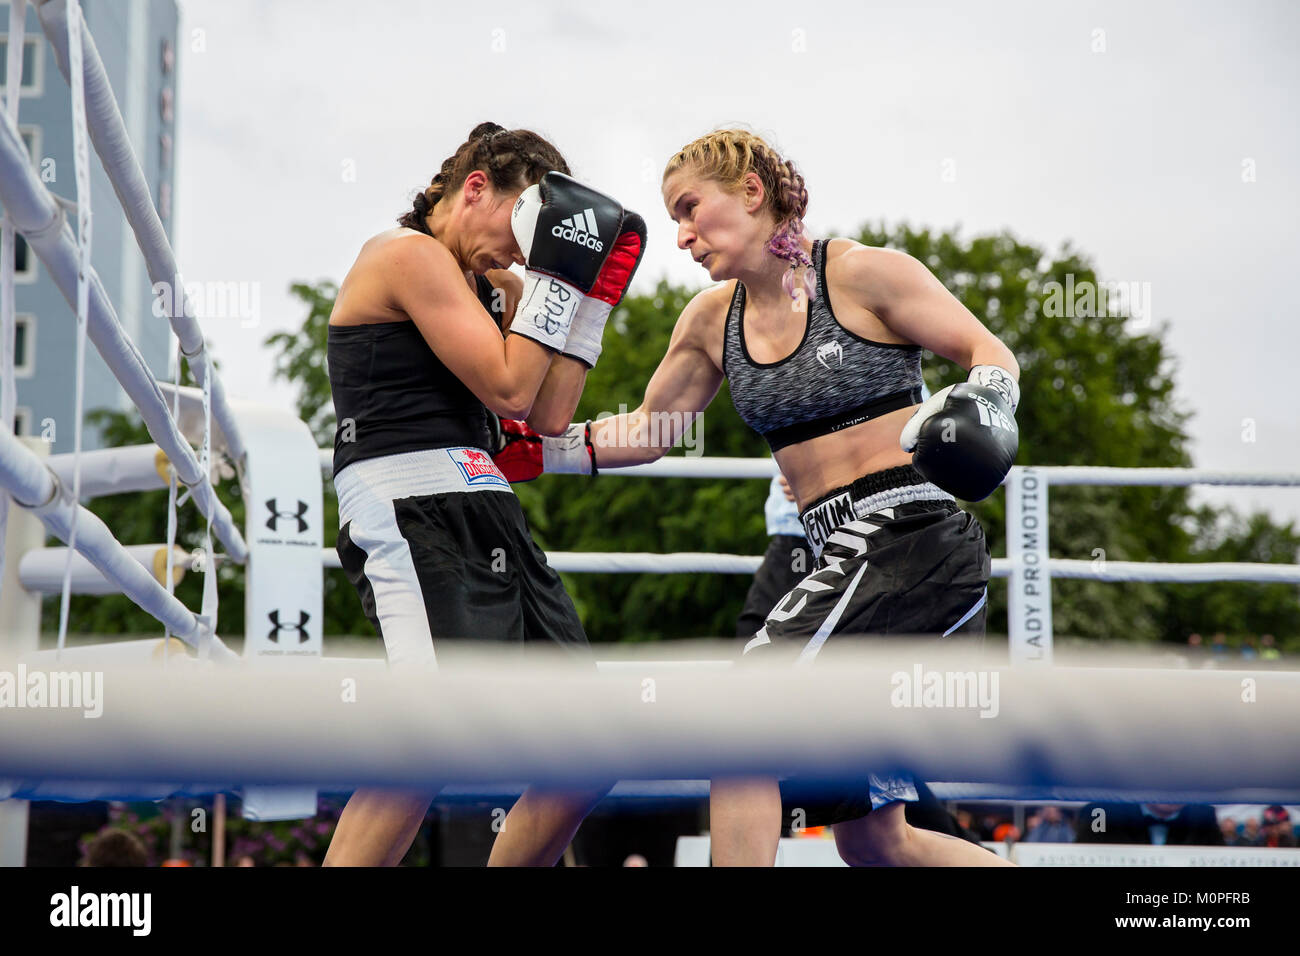 Norway, Bergen - June 09, 2017. The Icelandic boxer Valgerdur Gudsteinsdottir (R) fights the Hungarian boxer Marianna Gulyas (L) in the ring during the fight The Battle of Bergen in Bergen. (Photo credit: Gonzales Photo - Jarle H. Moe). Stock Photo